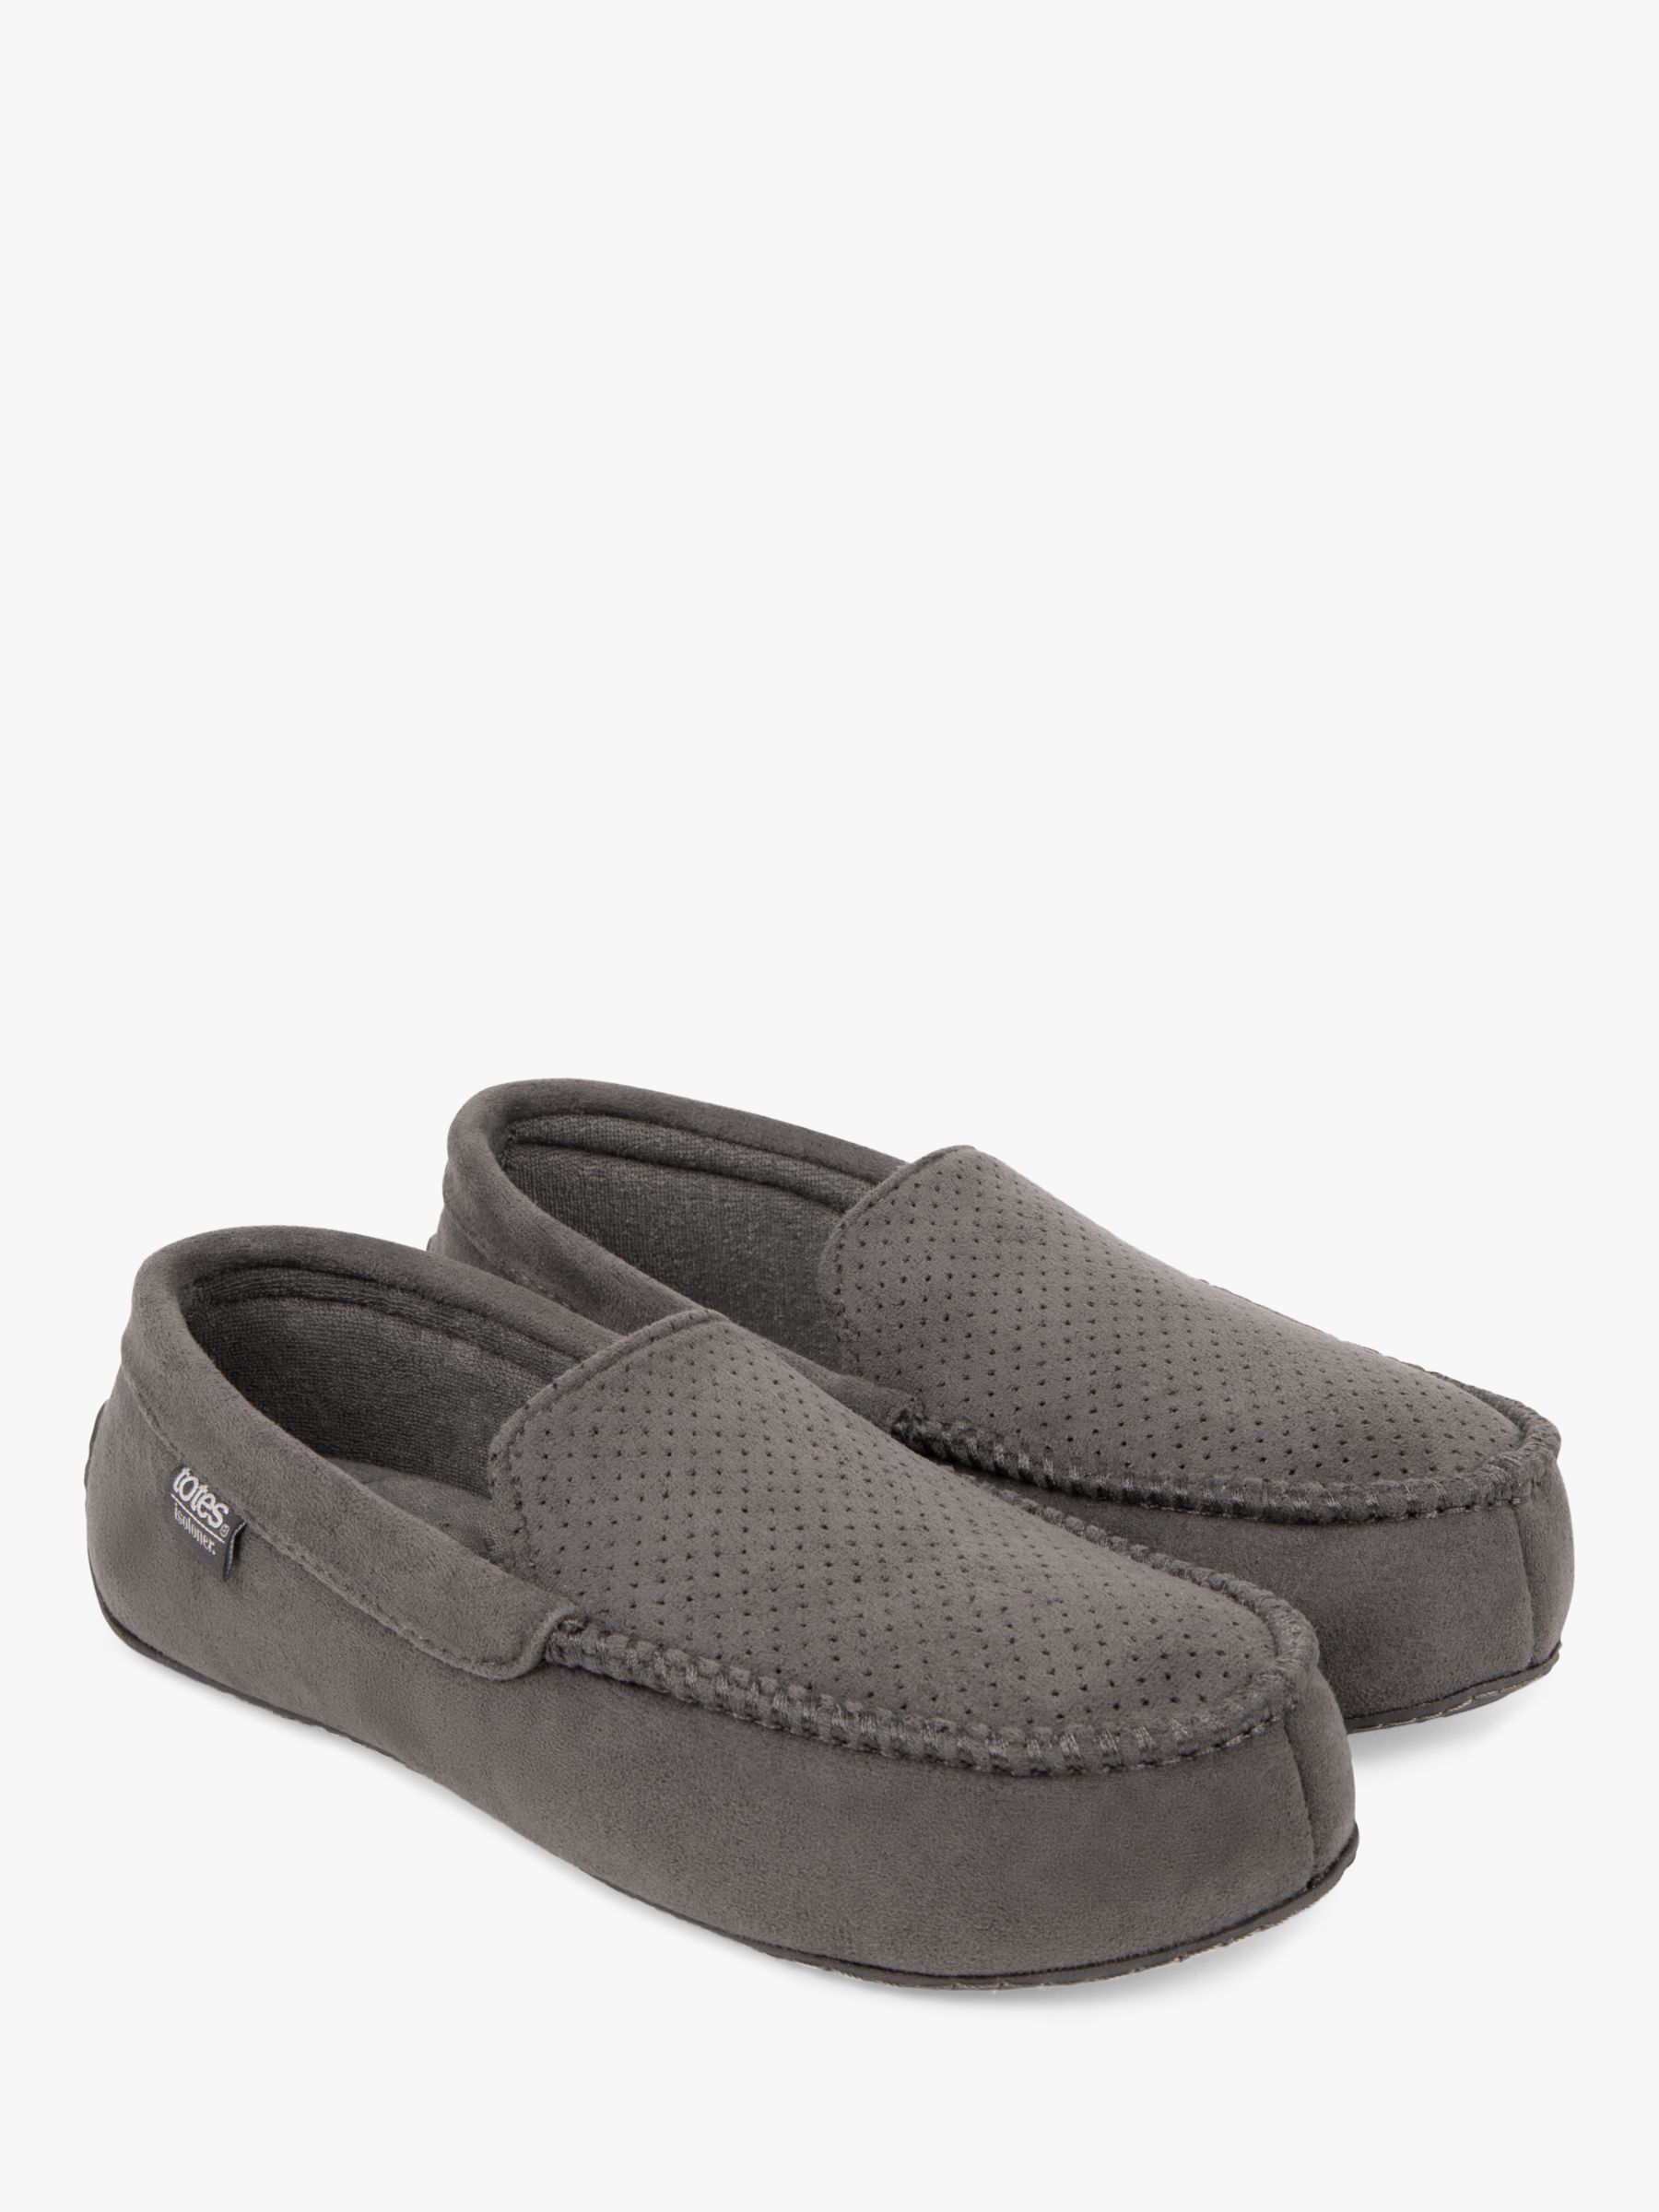 totes Airtex Suedette Moccasin Slippers, Grey, 8